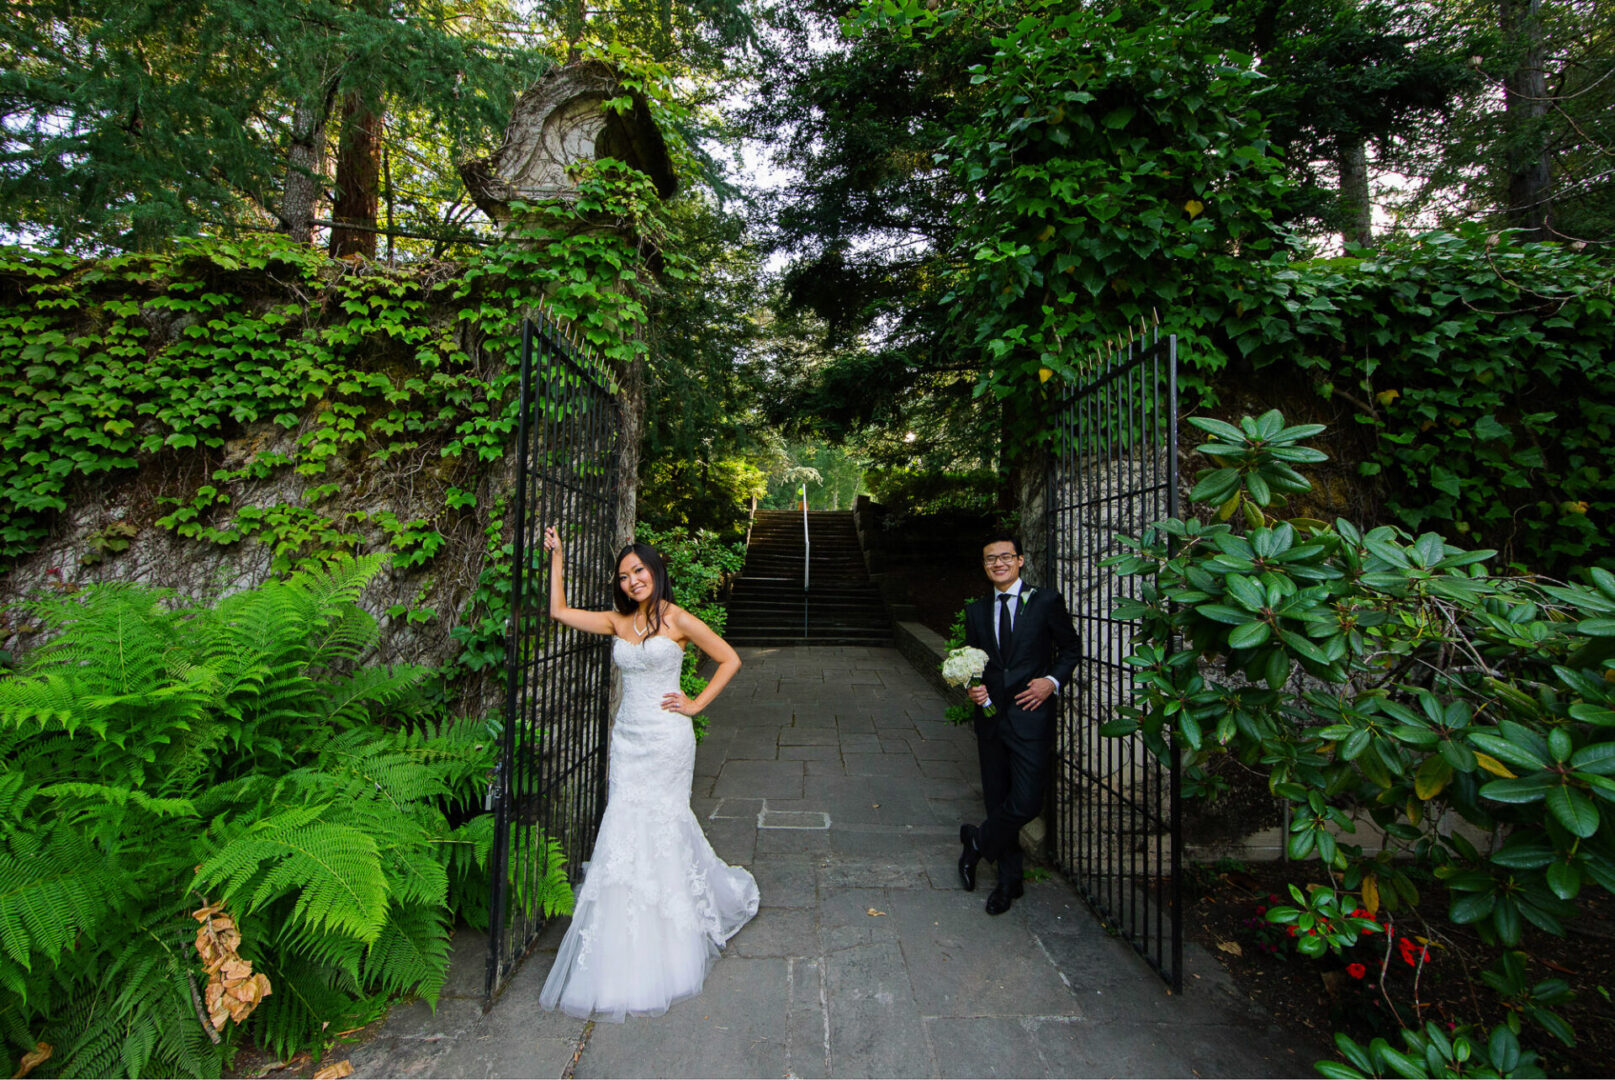 A newly married couple standing near a gate